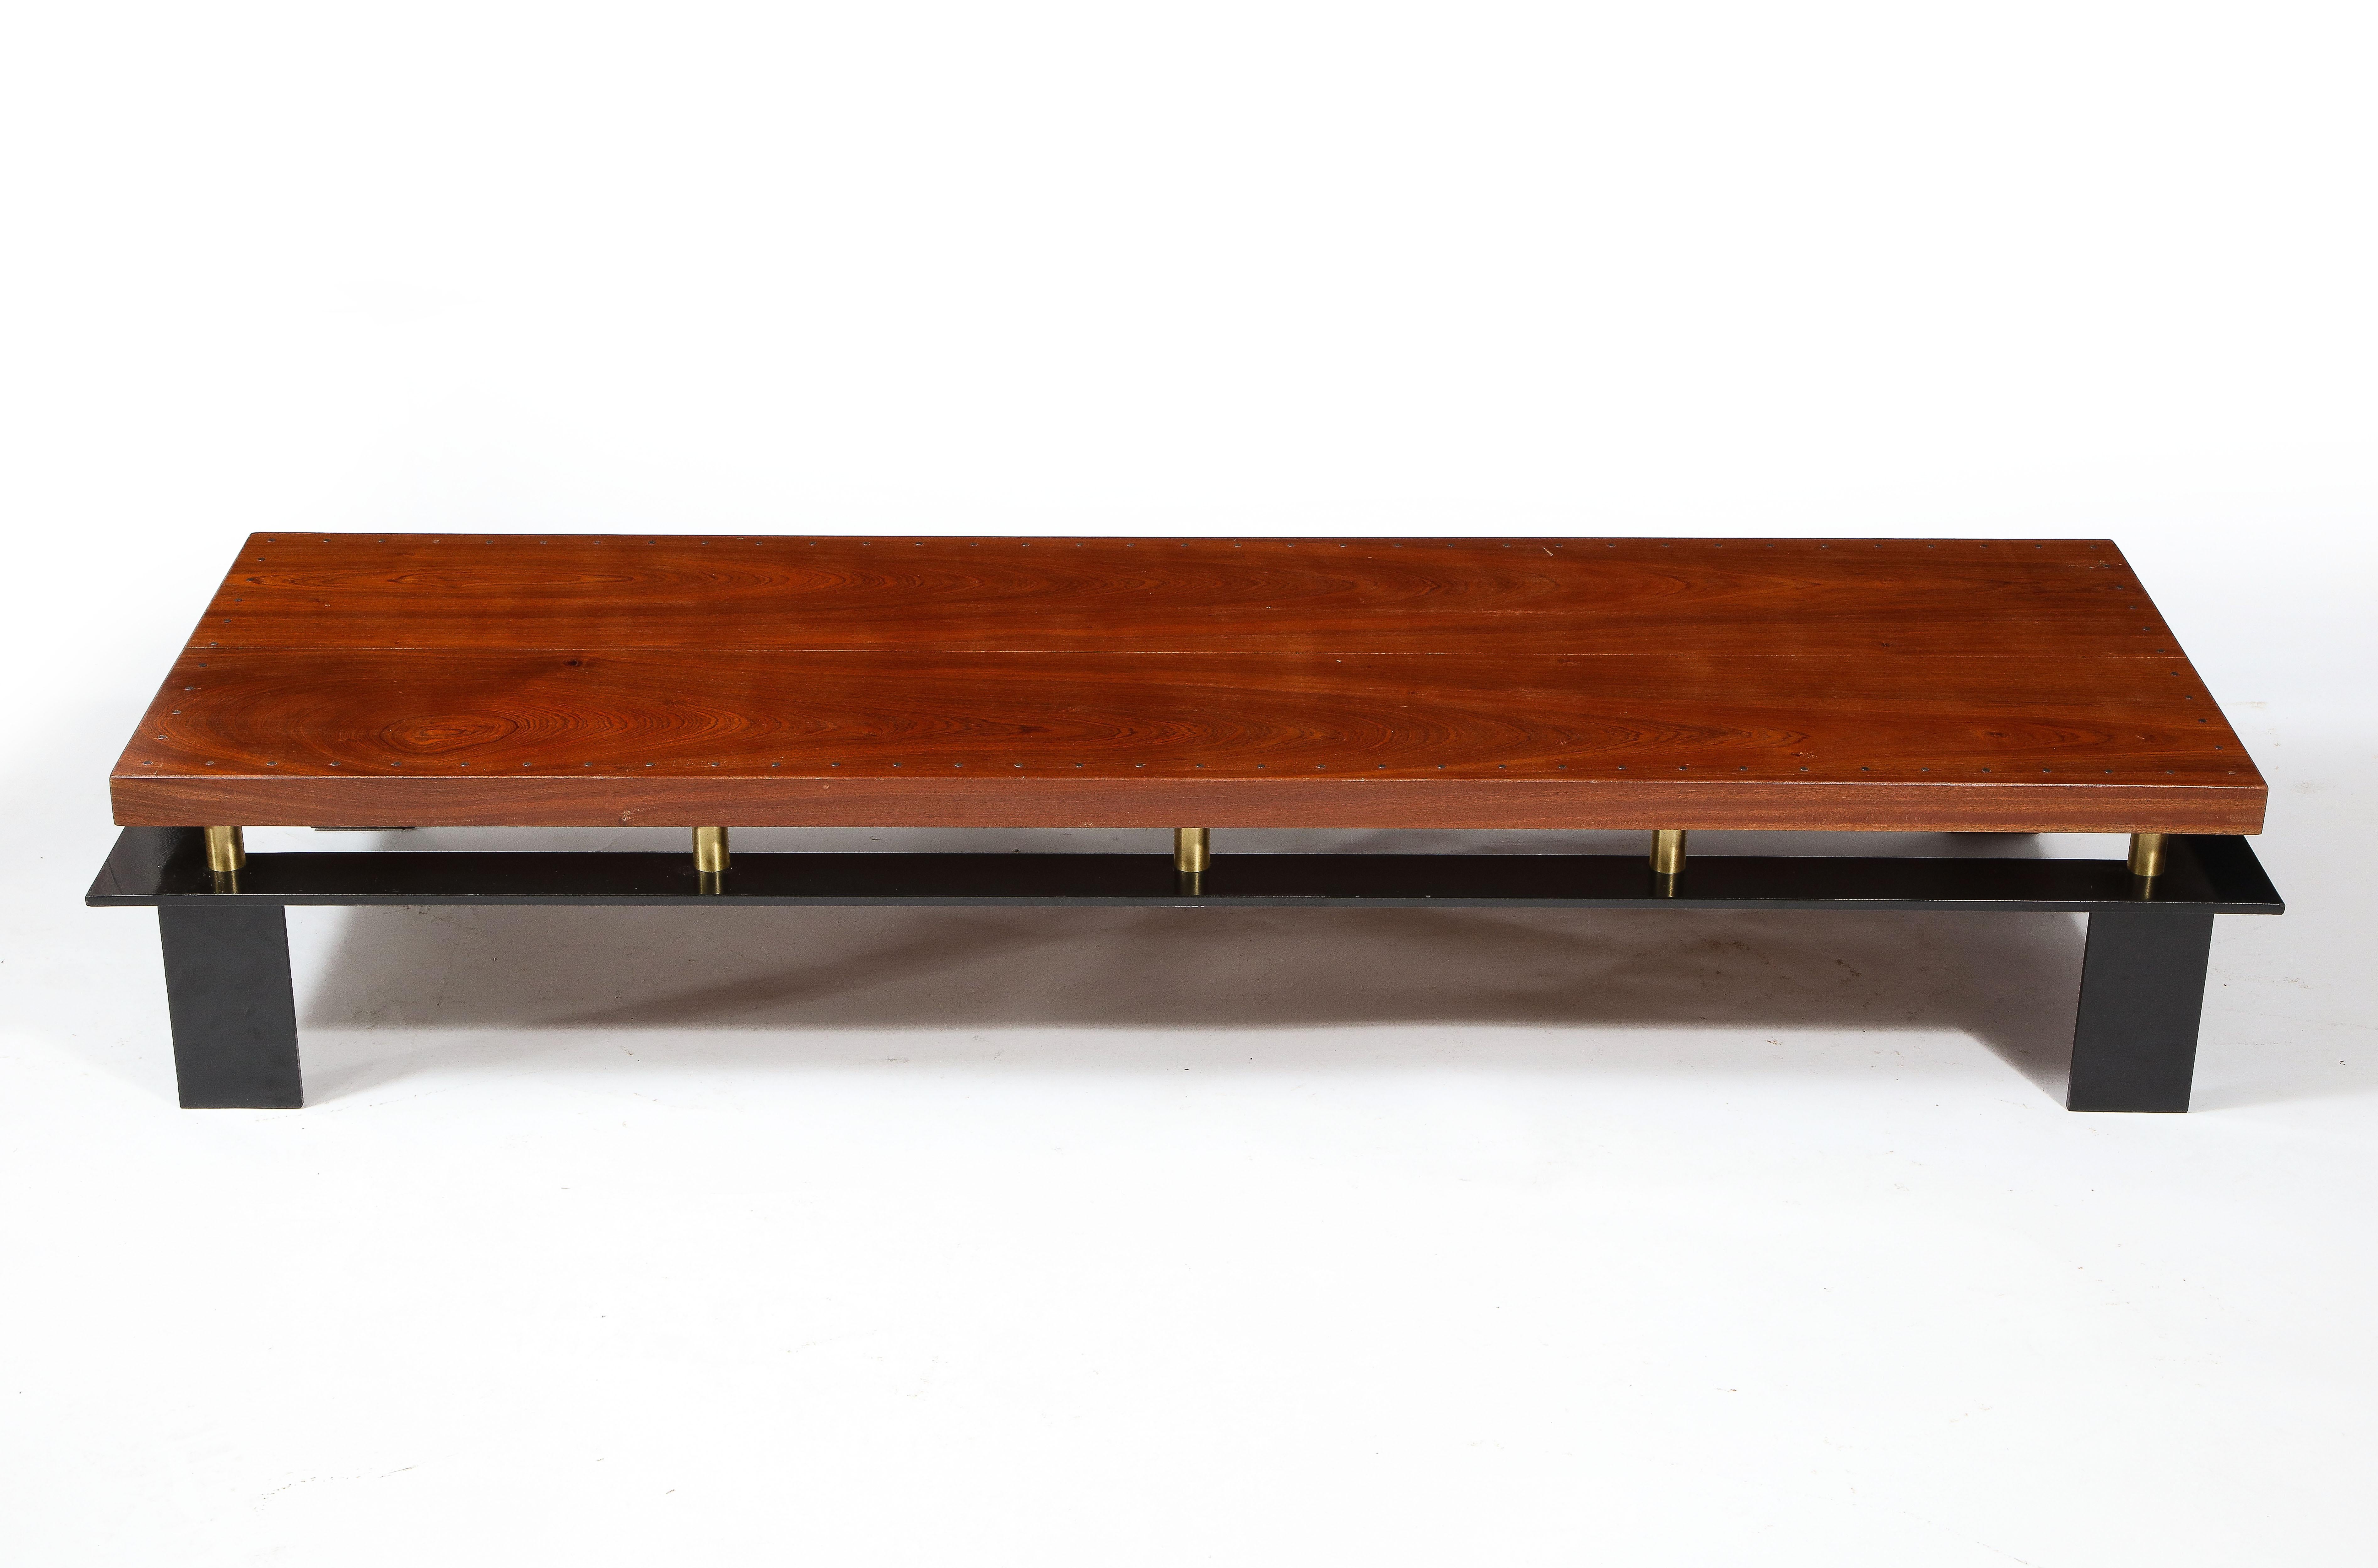 Large Long Low Modernist Steel & Walnut Coffee Table, France 1970's For Sale 8